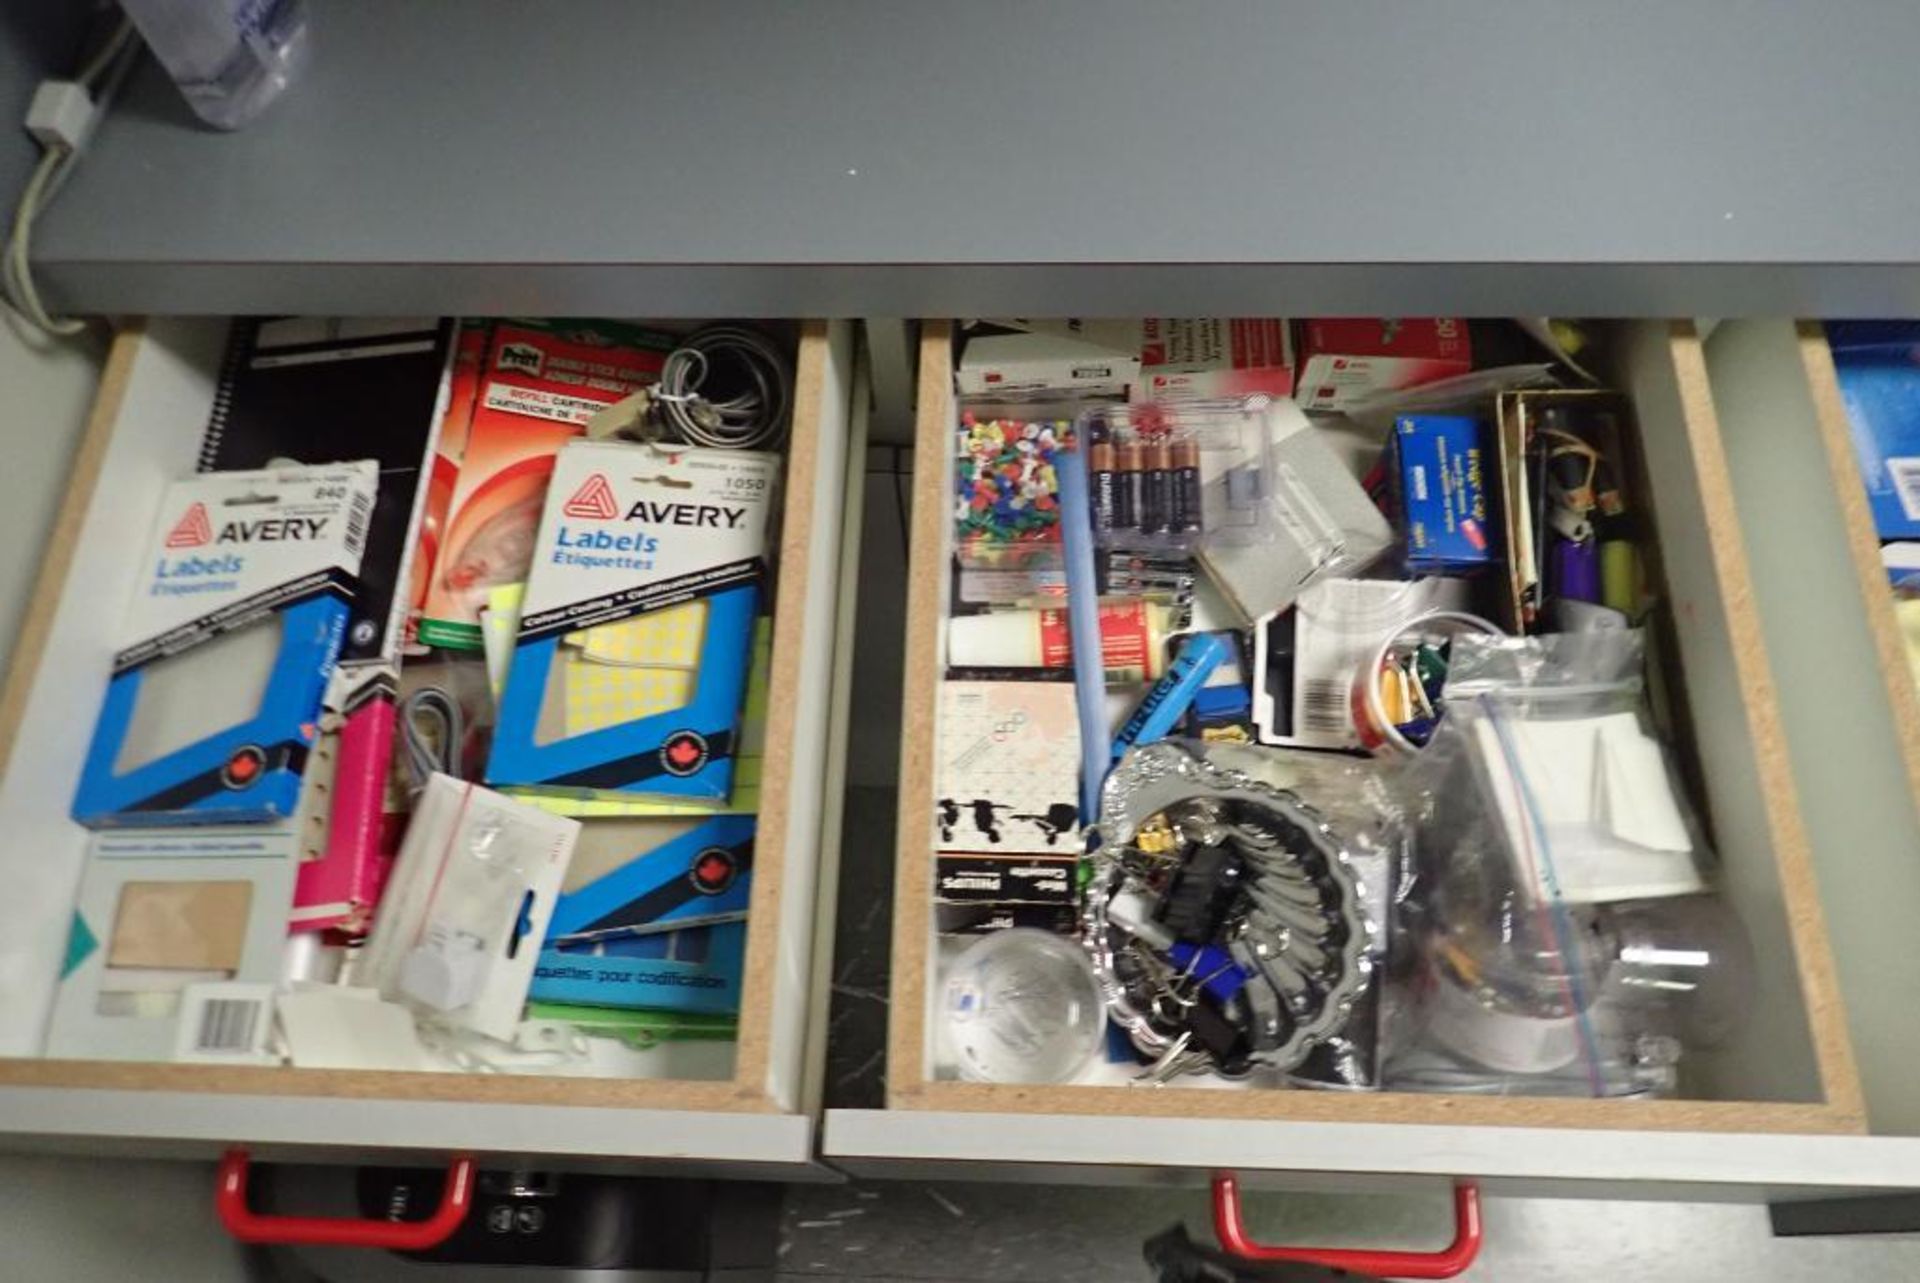 Contents of Copier Room. - Image 10 of 14